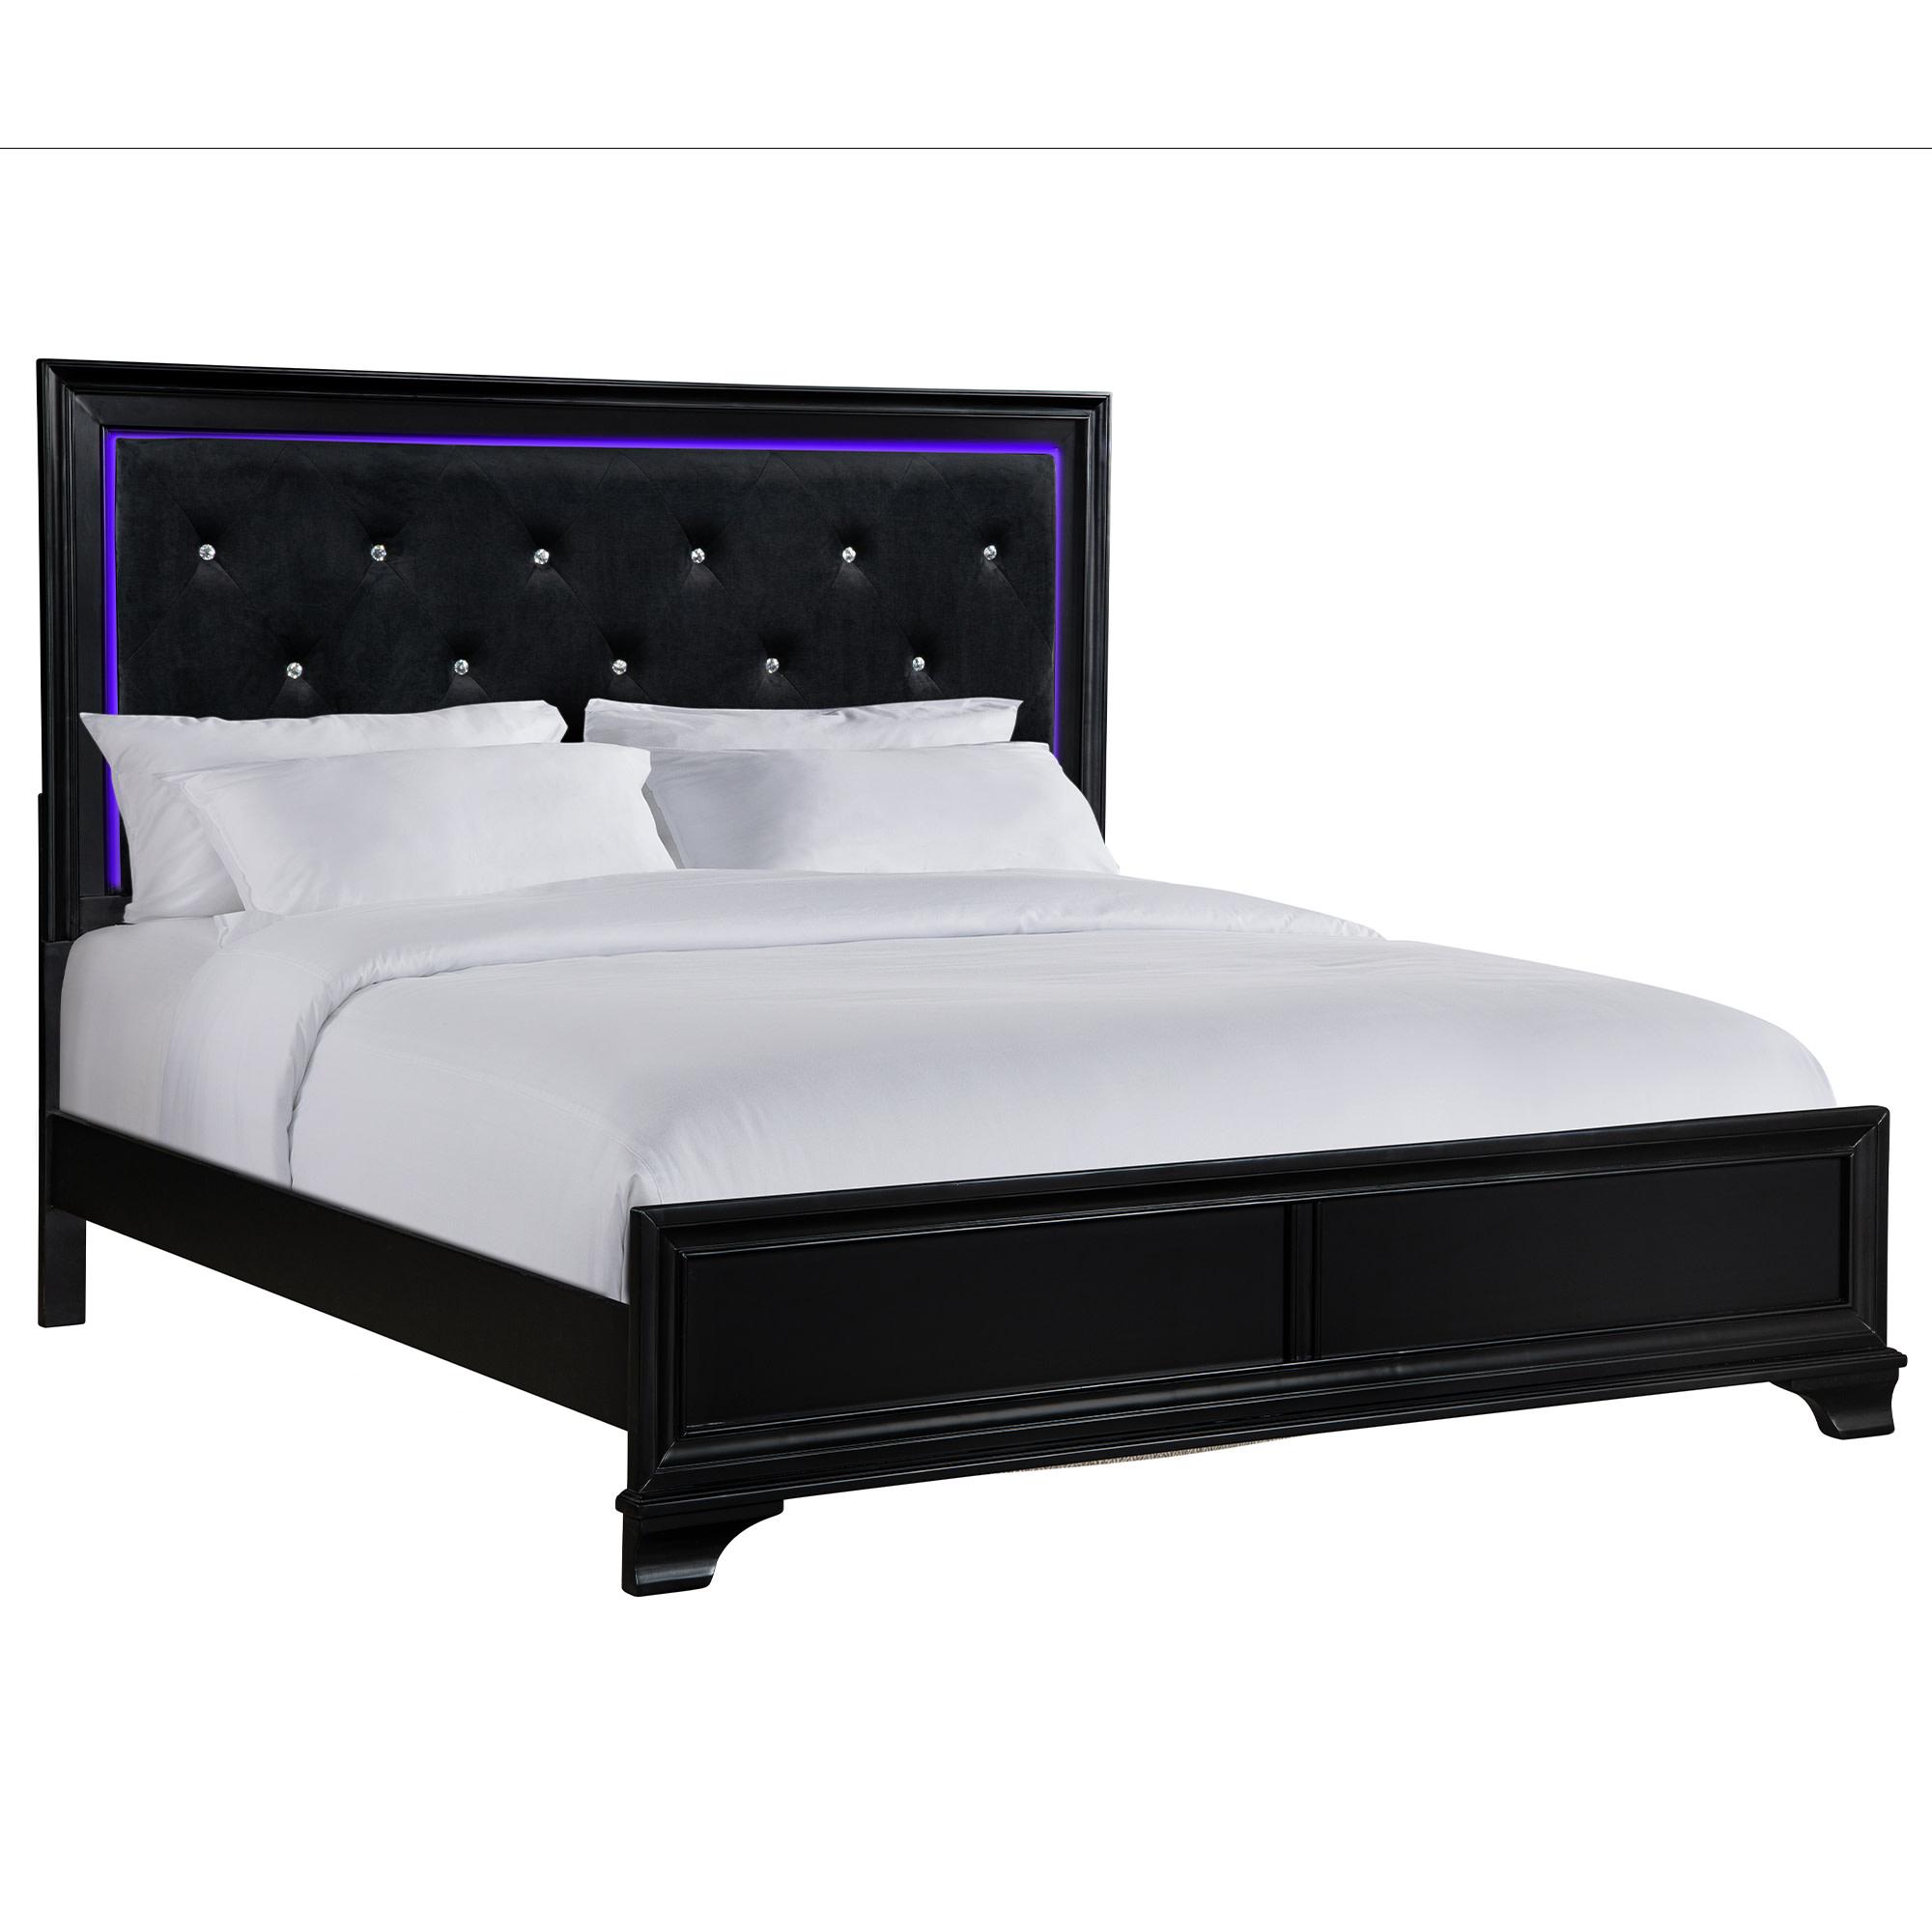 Brooklyn Black Queen Bed with LED Lighting